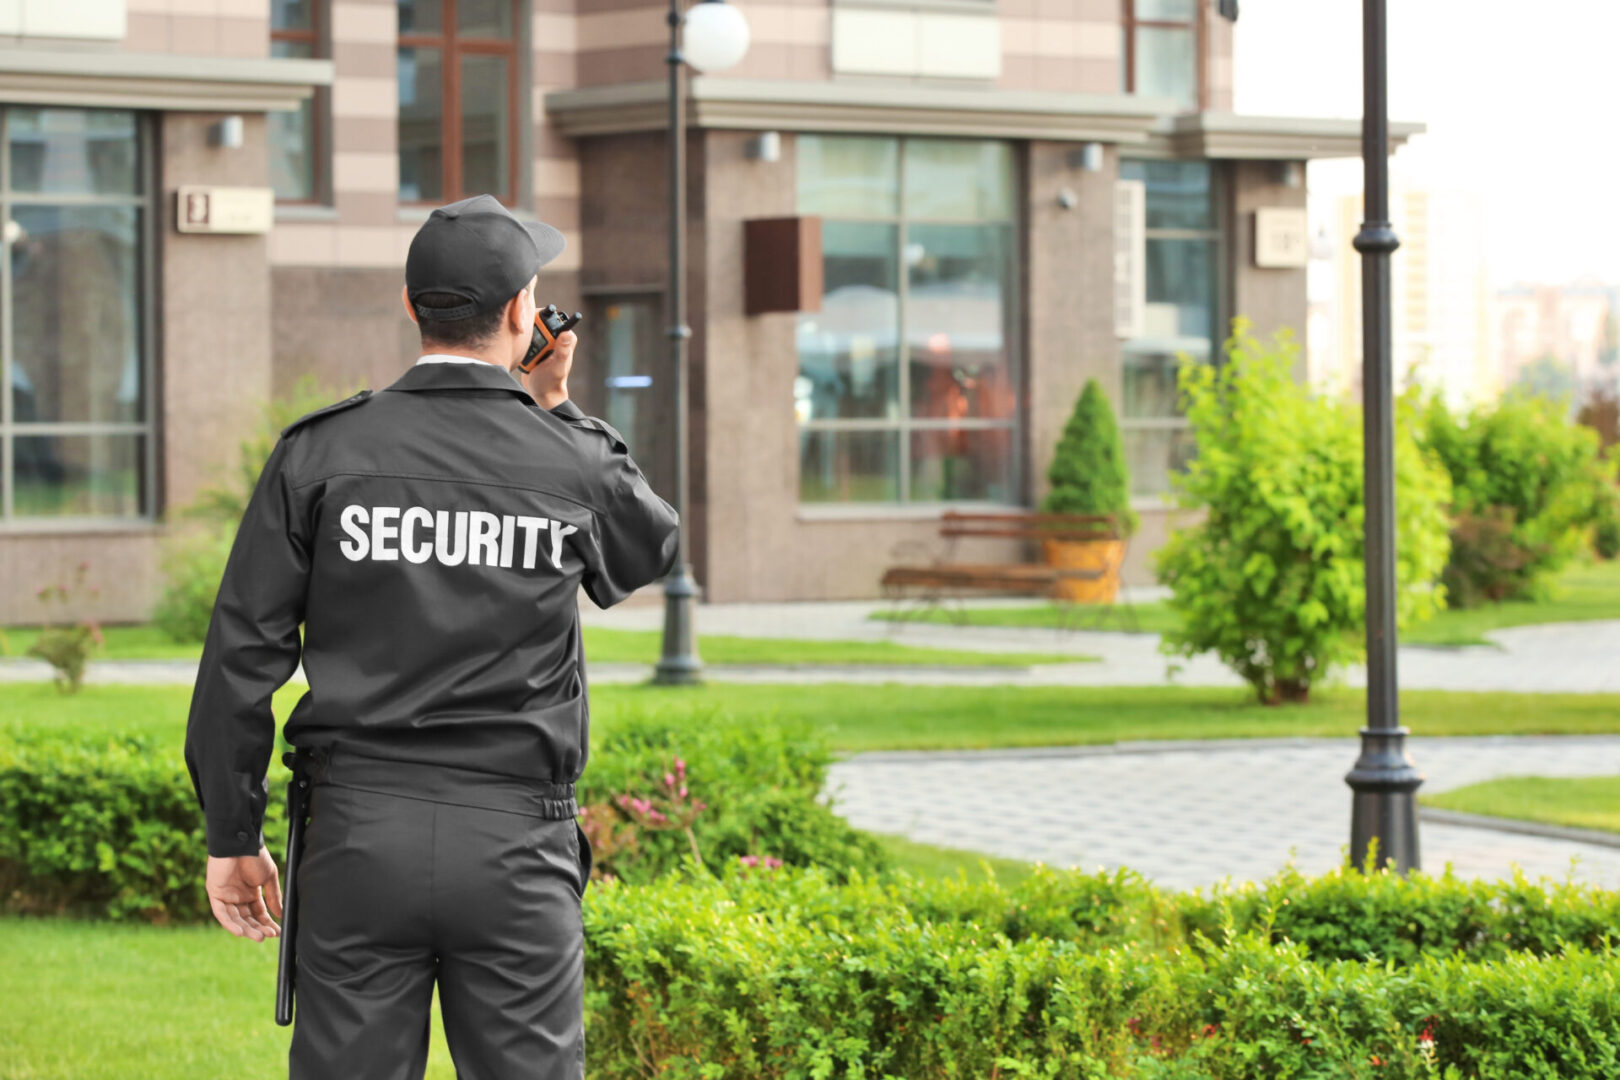 A security guard standing in front of a building.